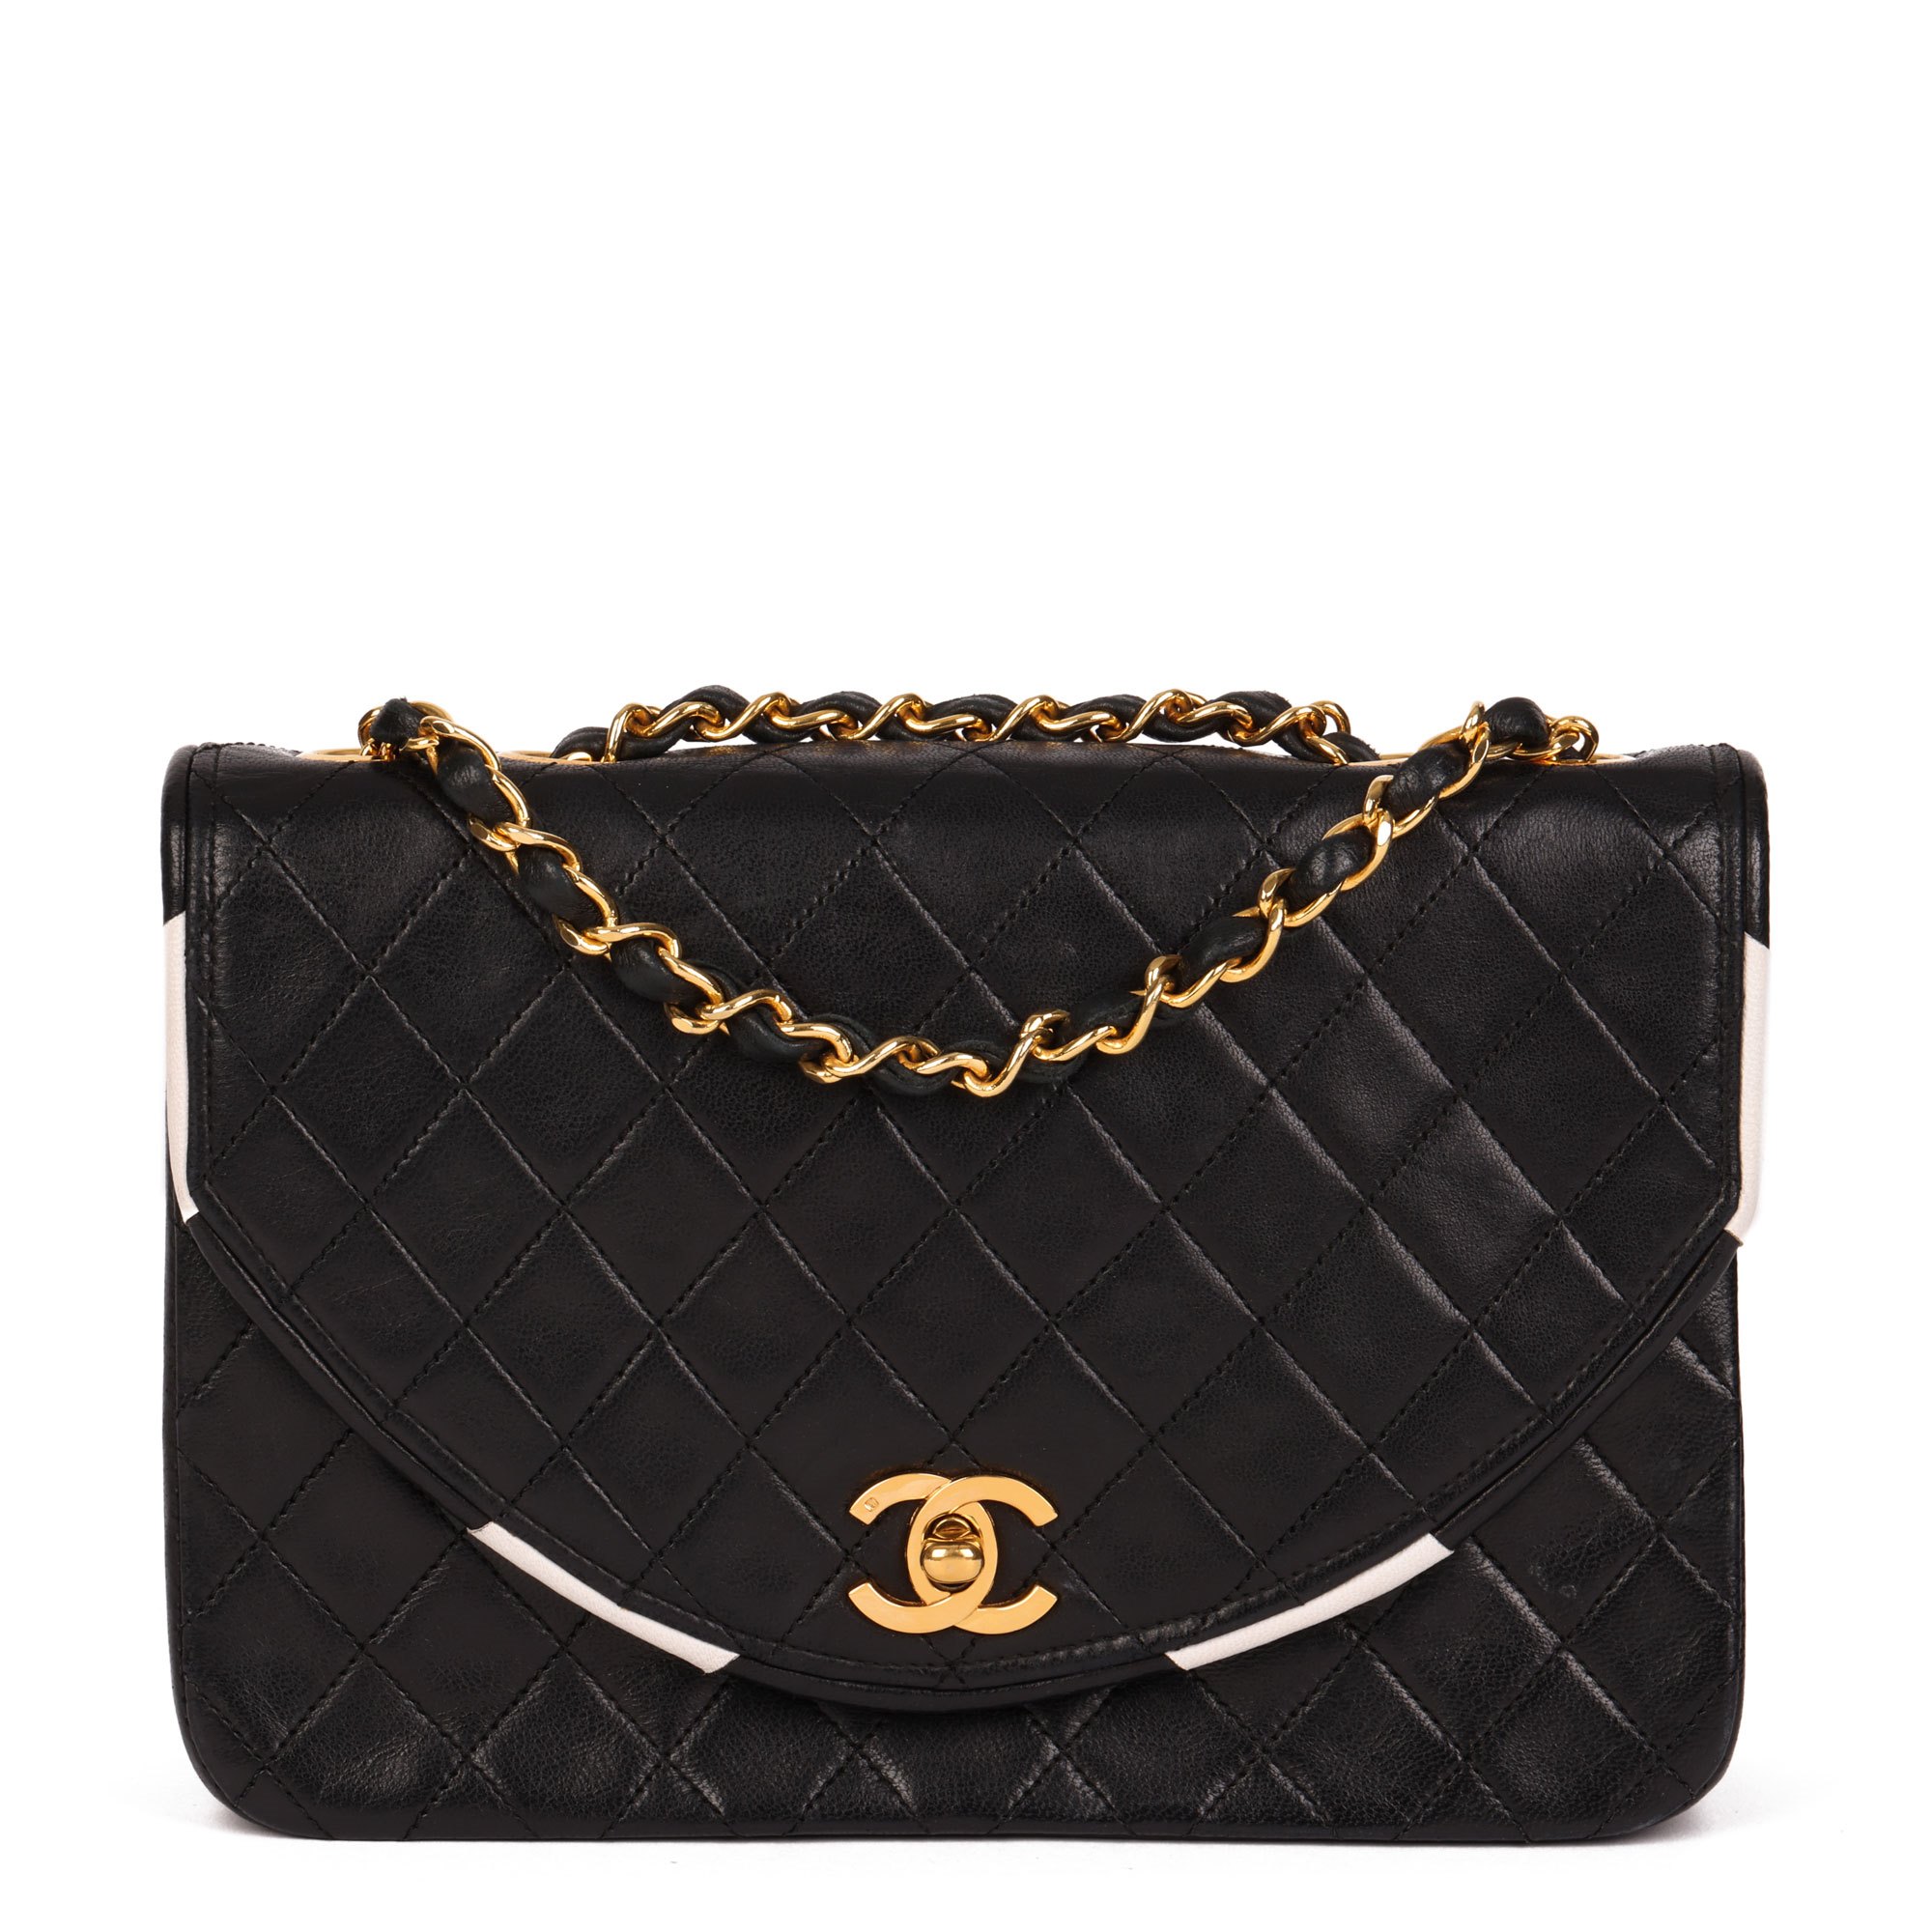 Chanel Black Quilted Lambskin Vintage Small Classic Single Flap Bag with White Trim